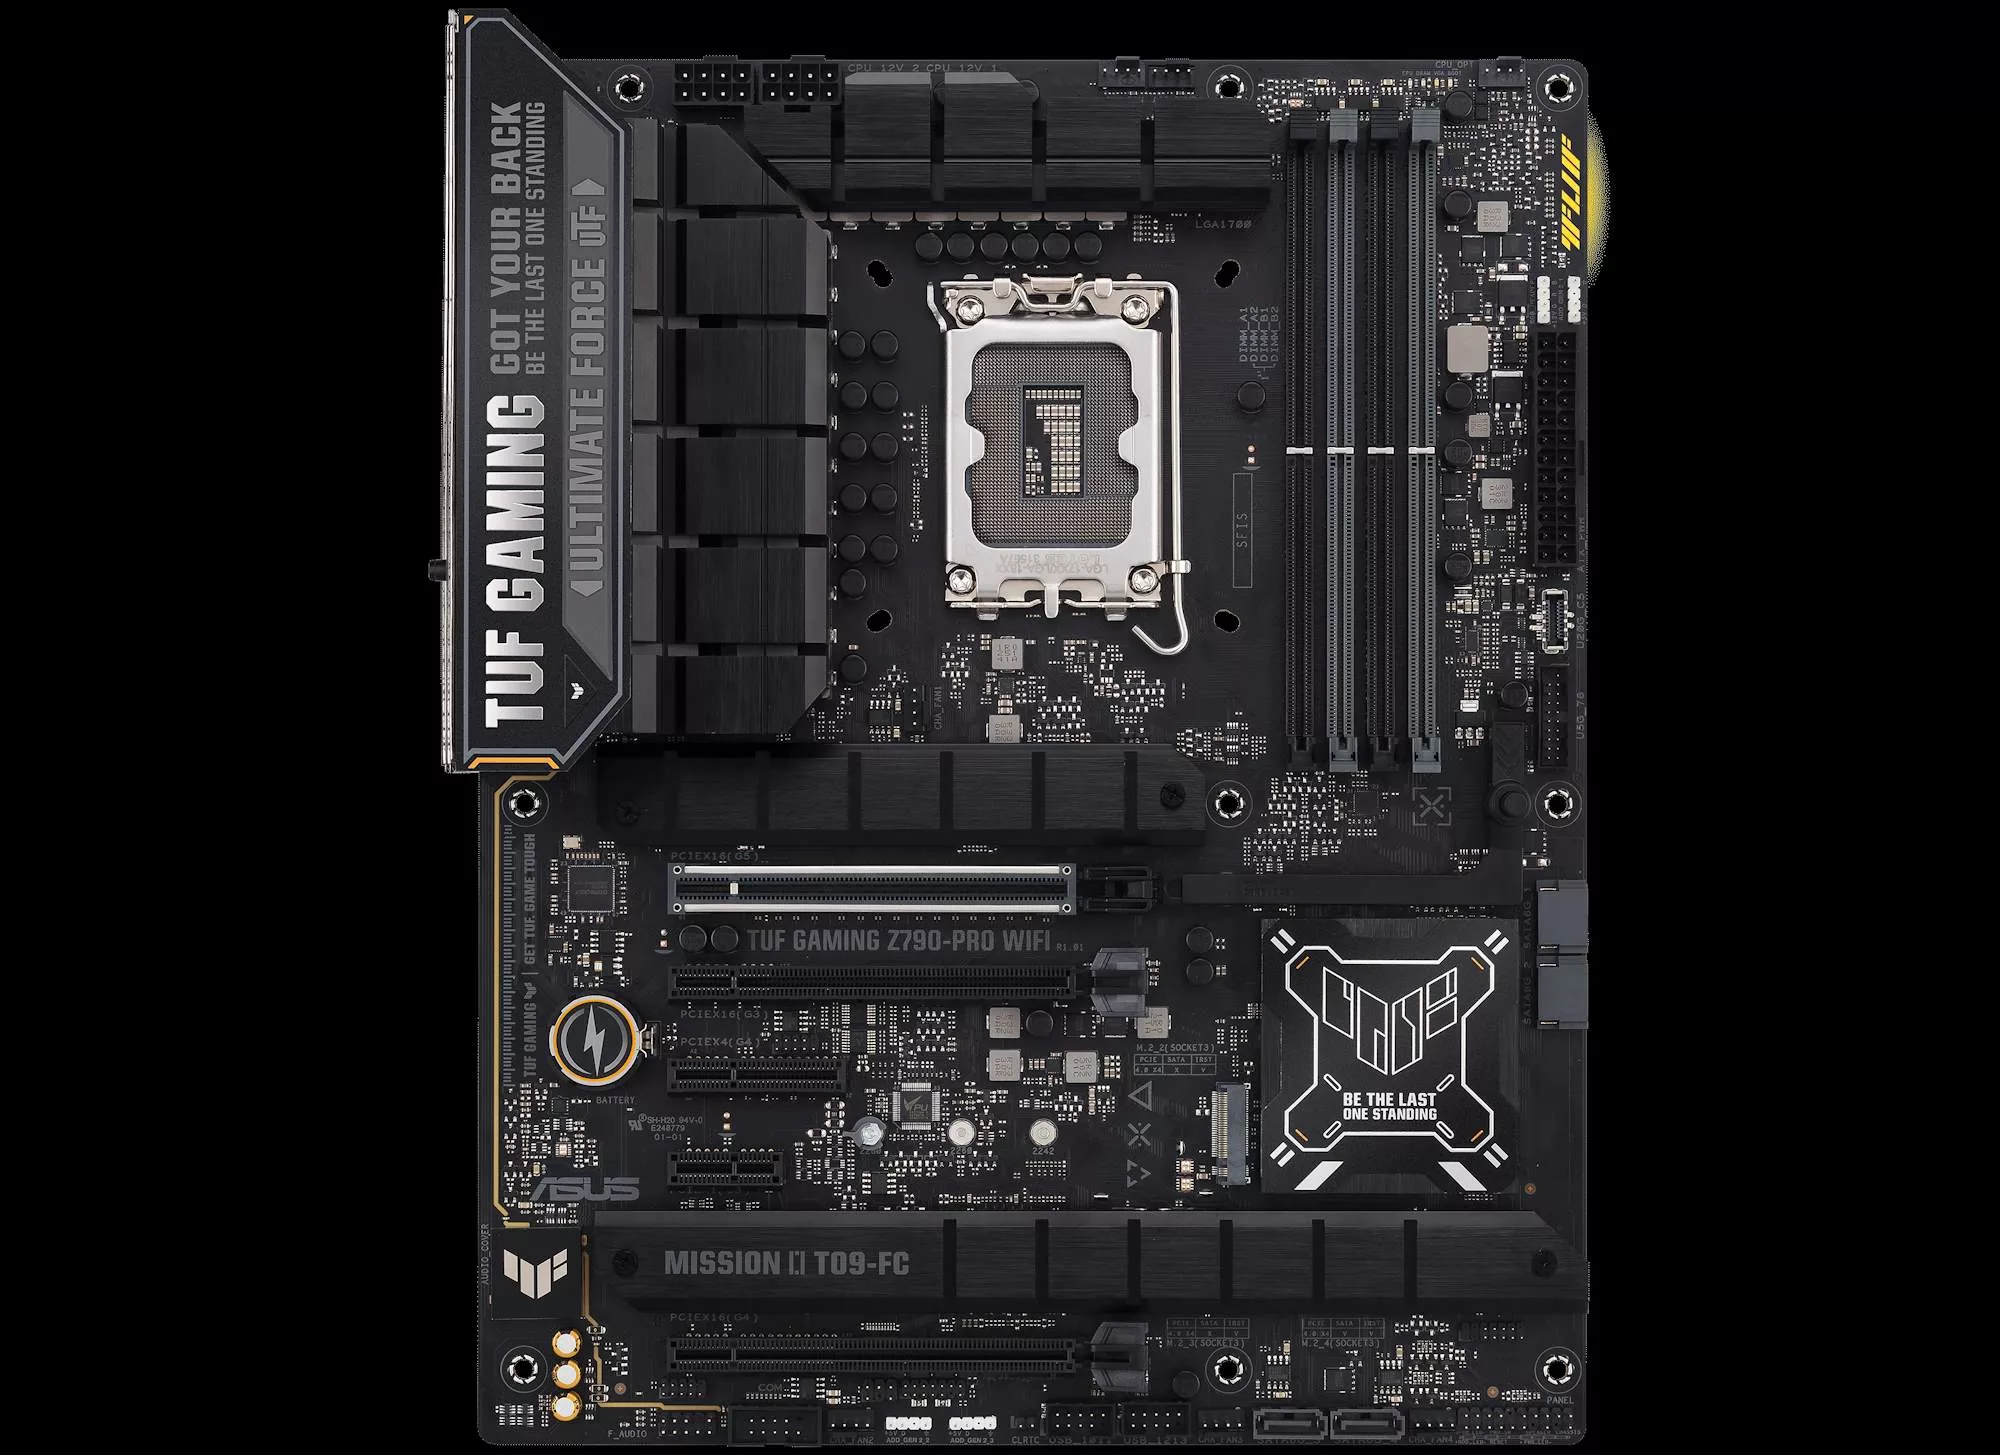 The TUF Gaming Z790-Pro WiFi gaming motherboard